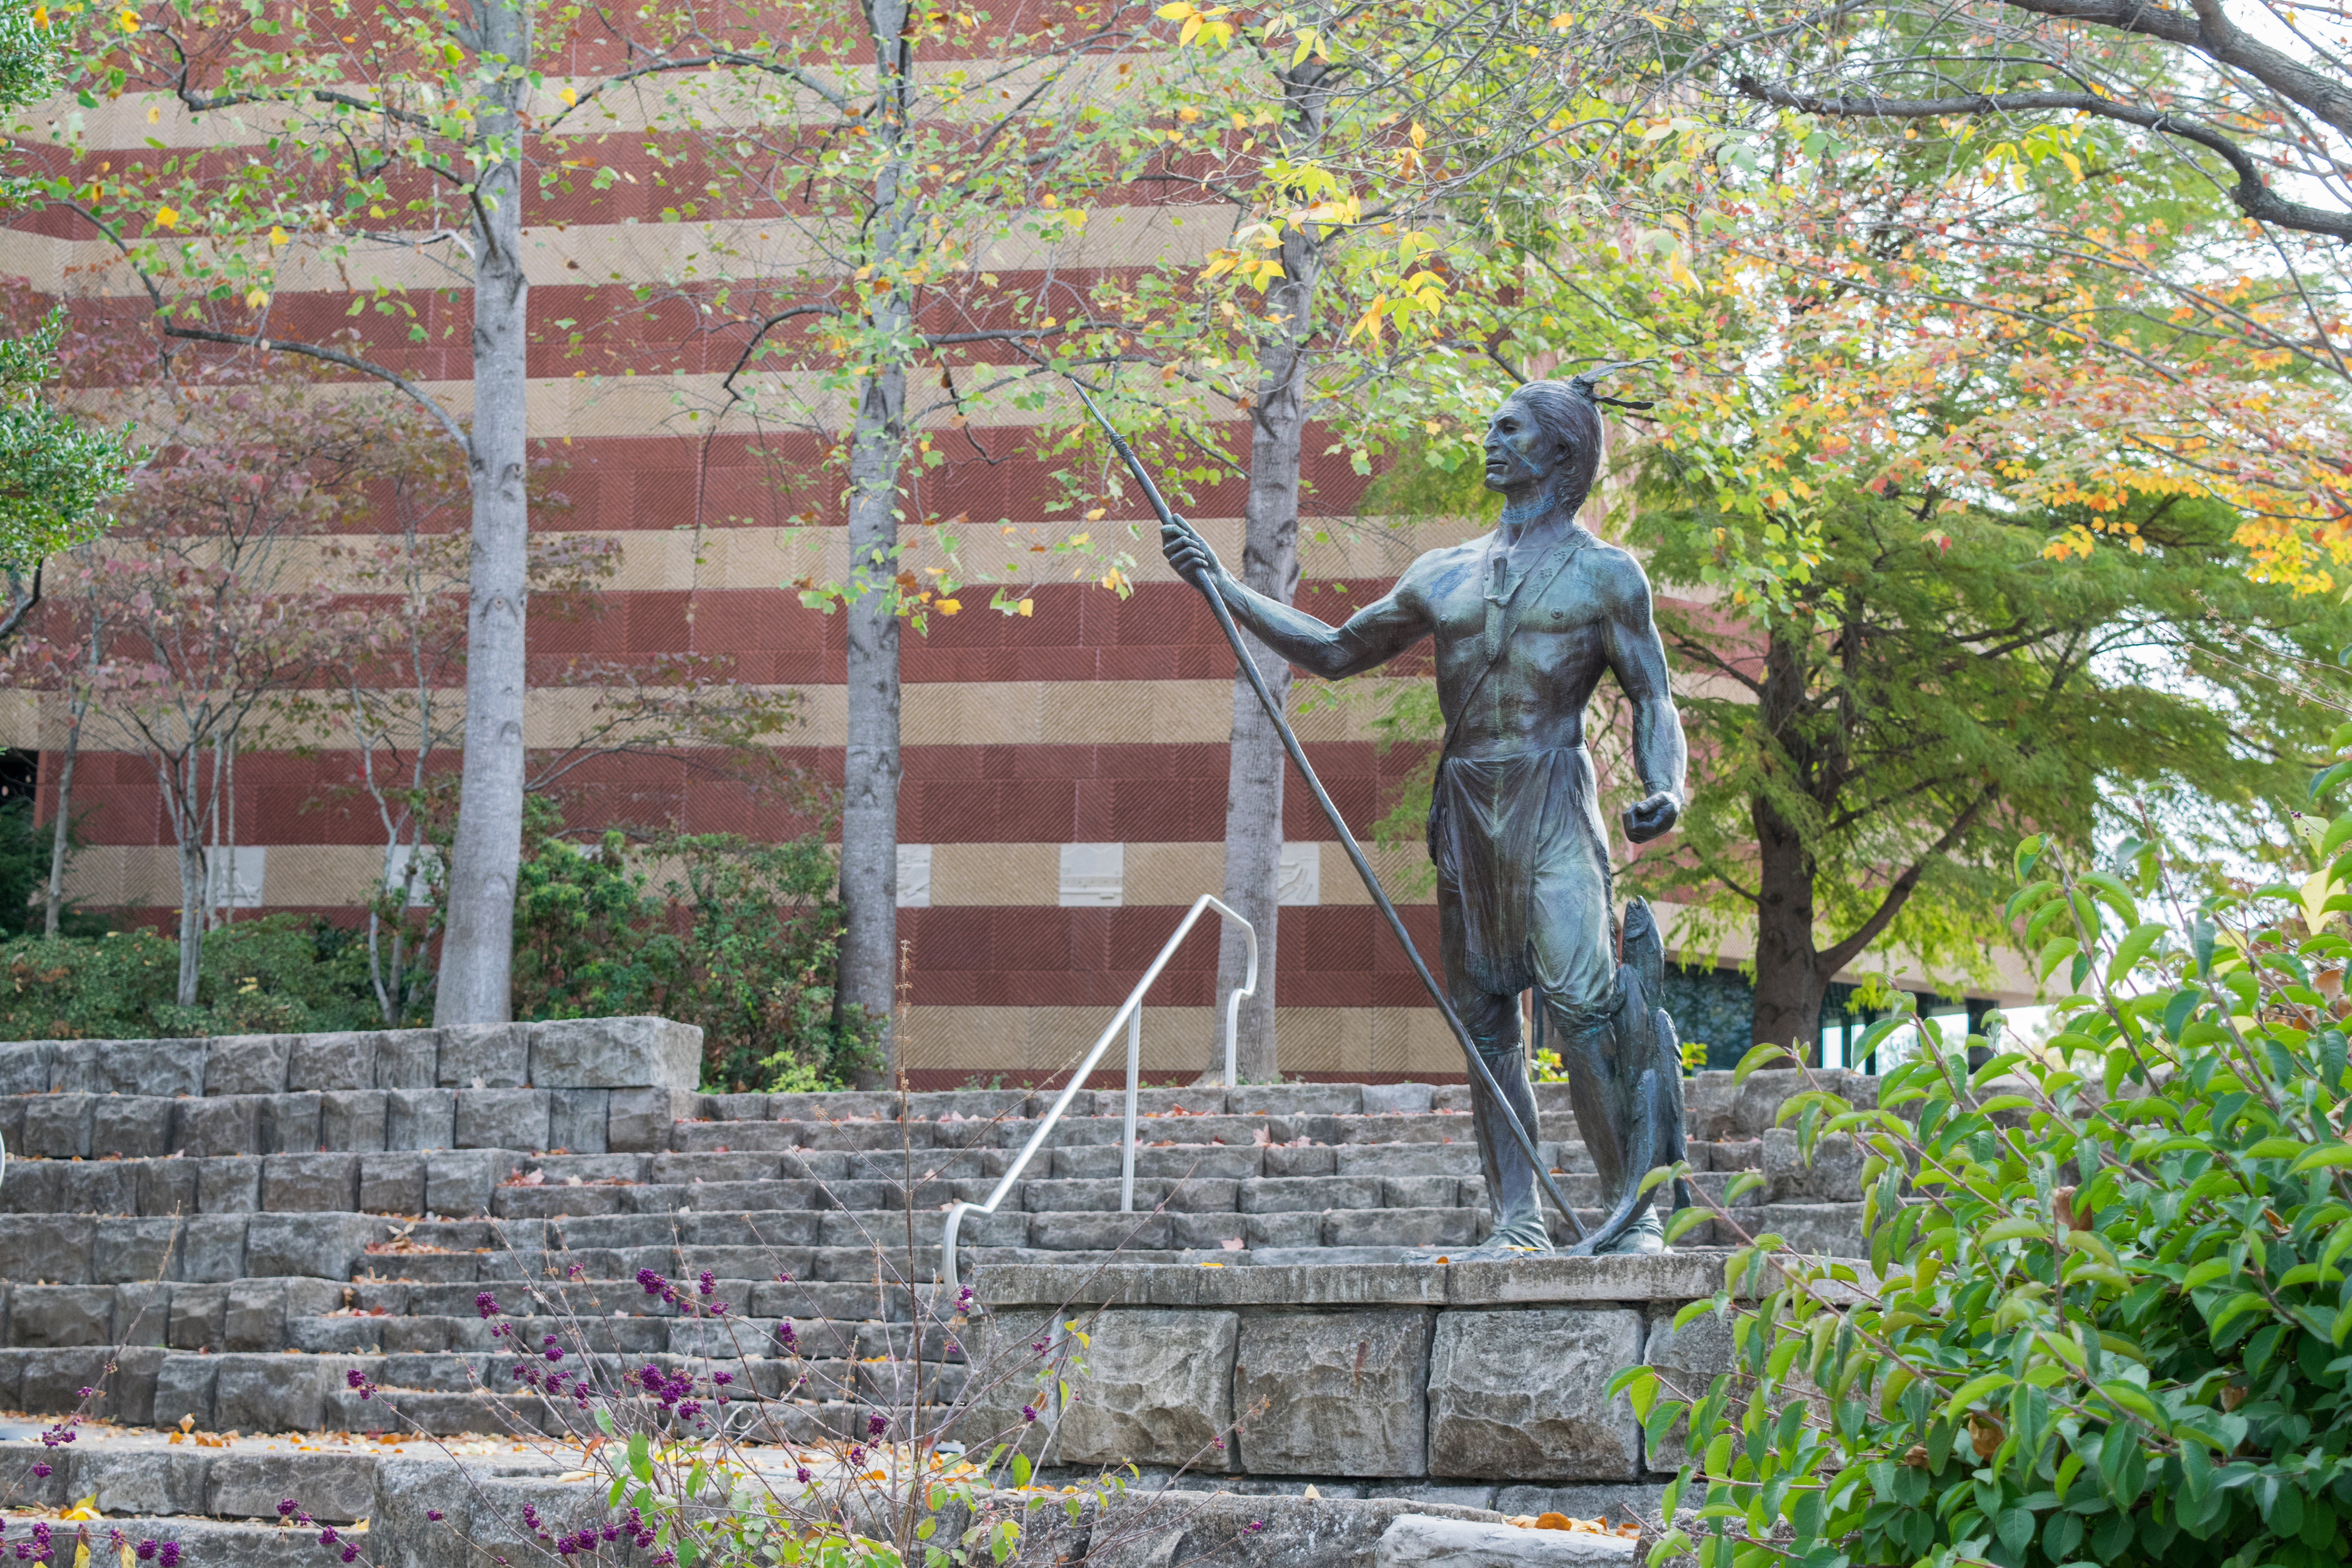 Statue of Cherokee at river bank with fish - Walk Cha Tour in Chattanooga